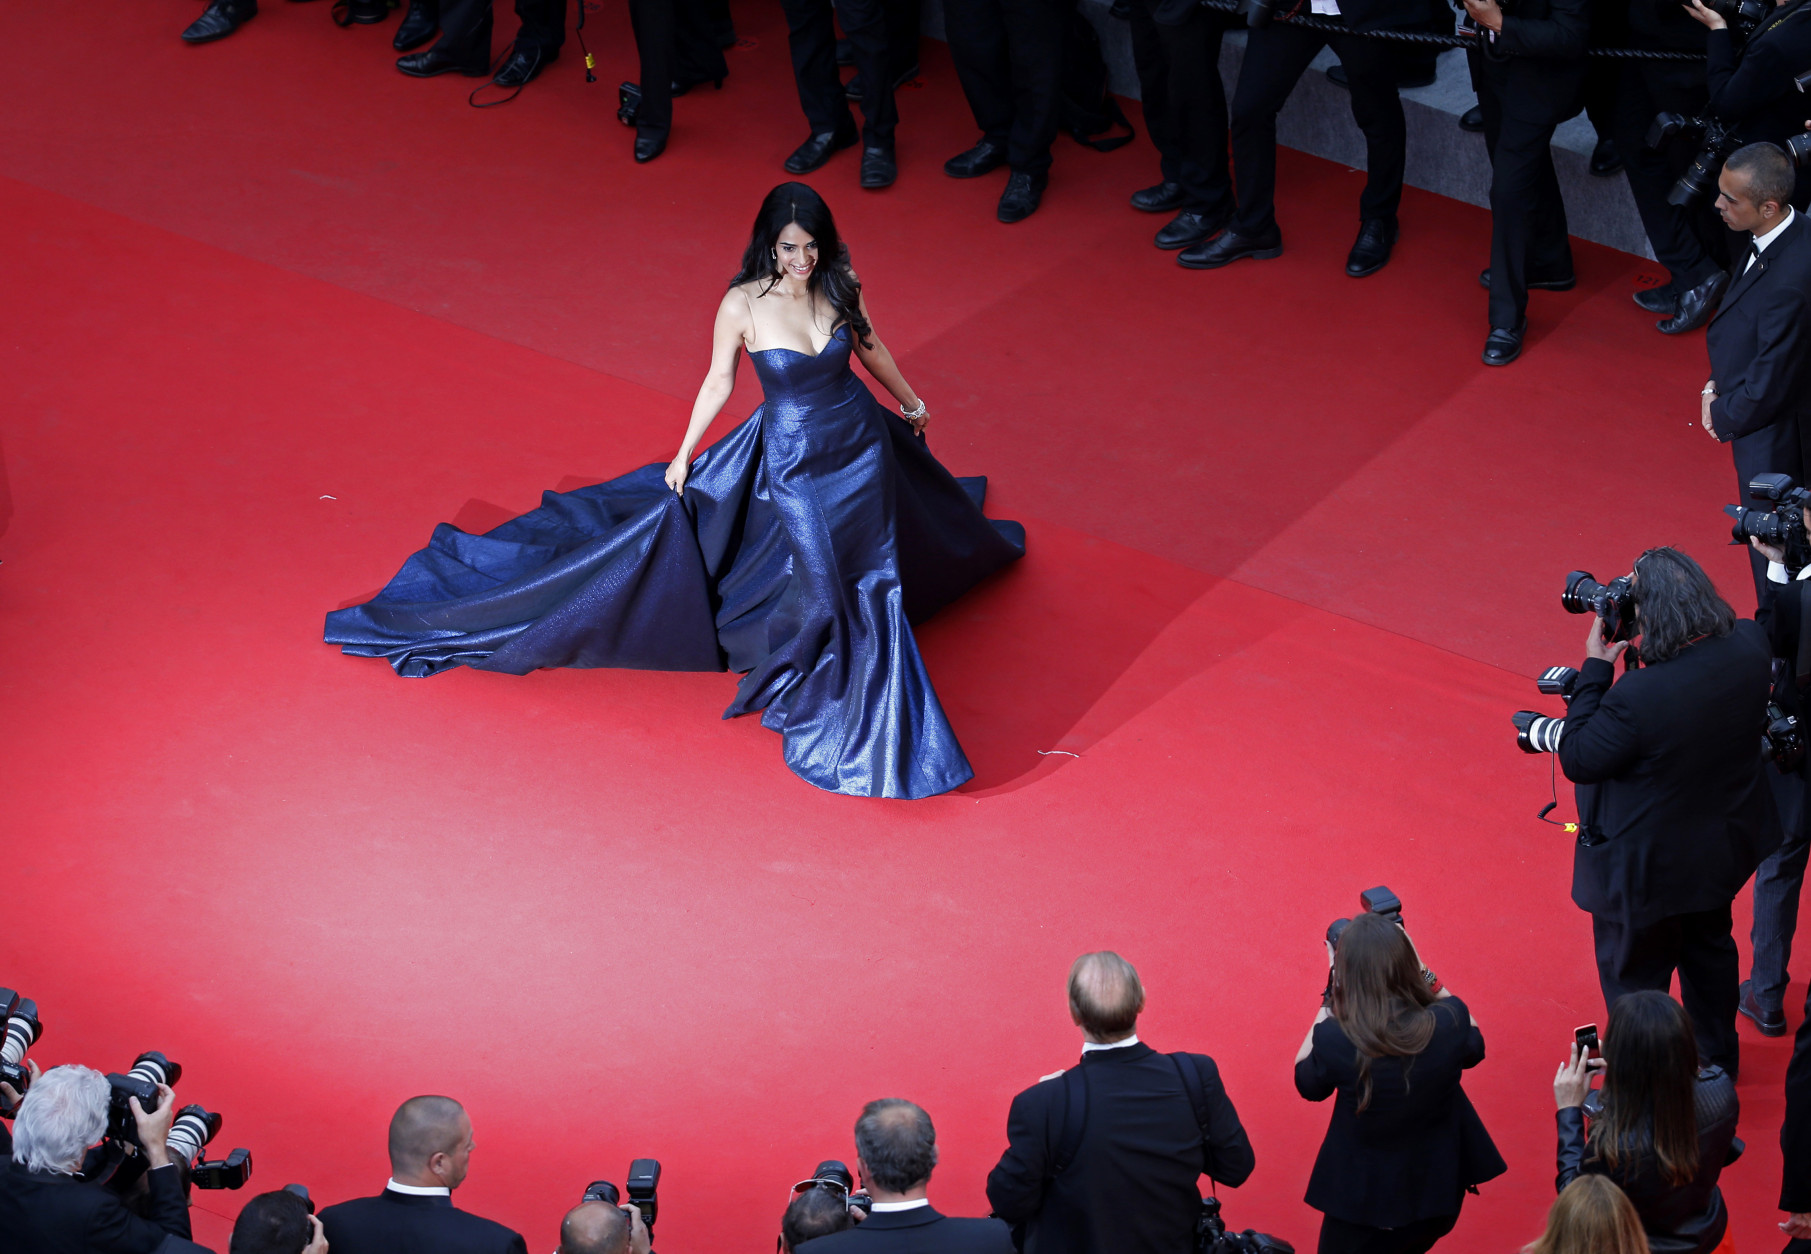 Actress Mallika Sherawat poses for the screening of the film Macbeth at the 68th international film festival, Cannes, southern France, Saturday, May 23, 2015. (Eric Gaillard/Pool via AP)